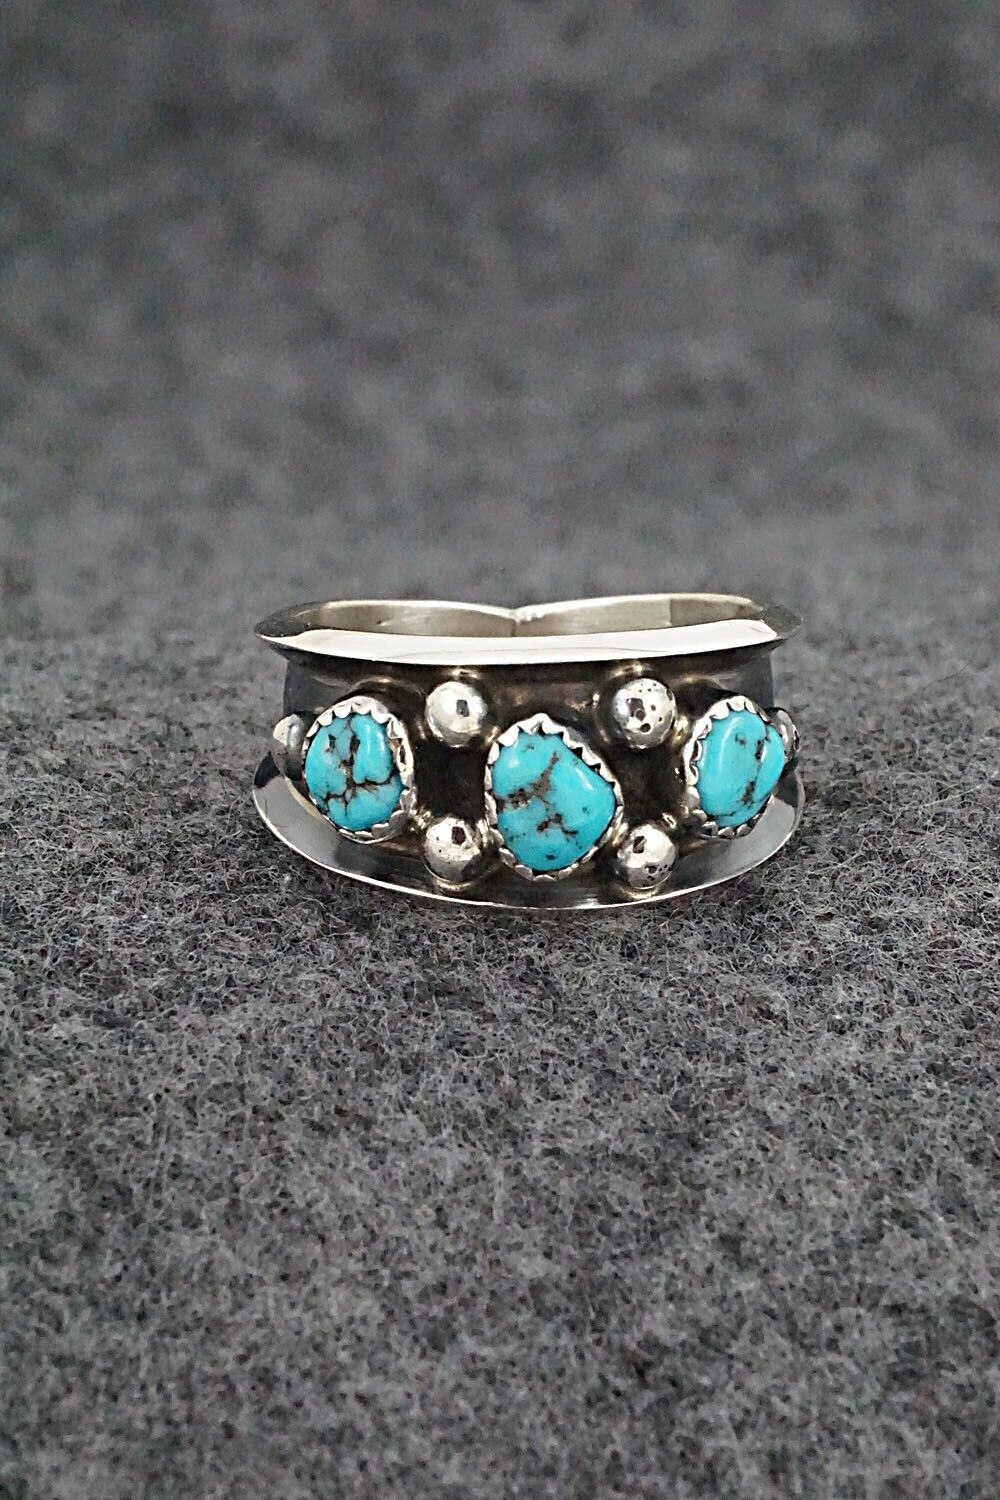 Turquoise & Sterling Silver Ring - Paul Largo - Size 8.5 – High